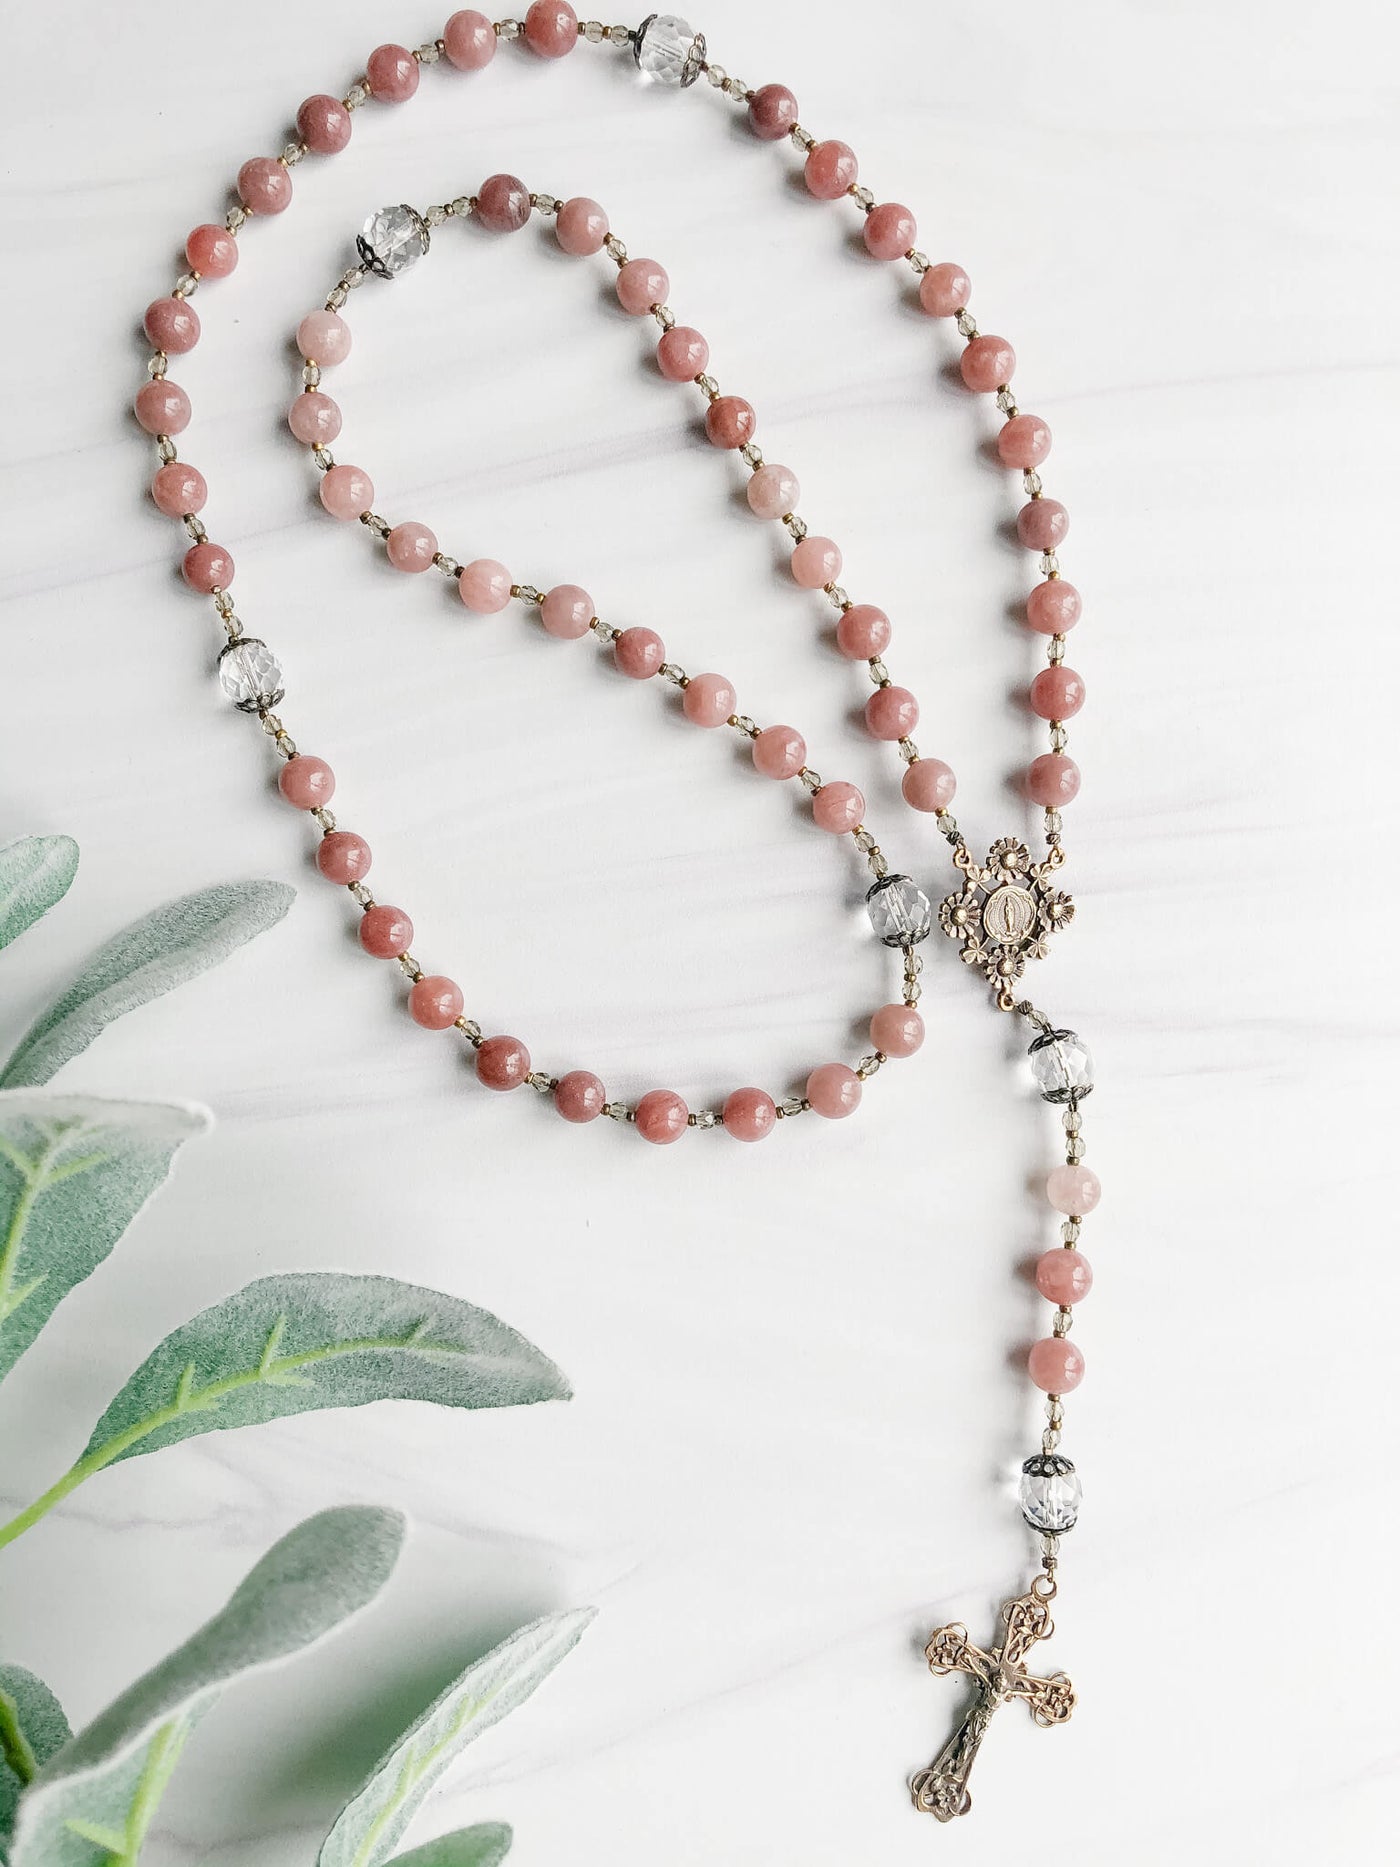 Our Lady's Garden Rosary